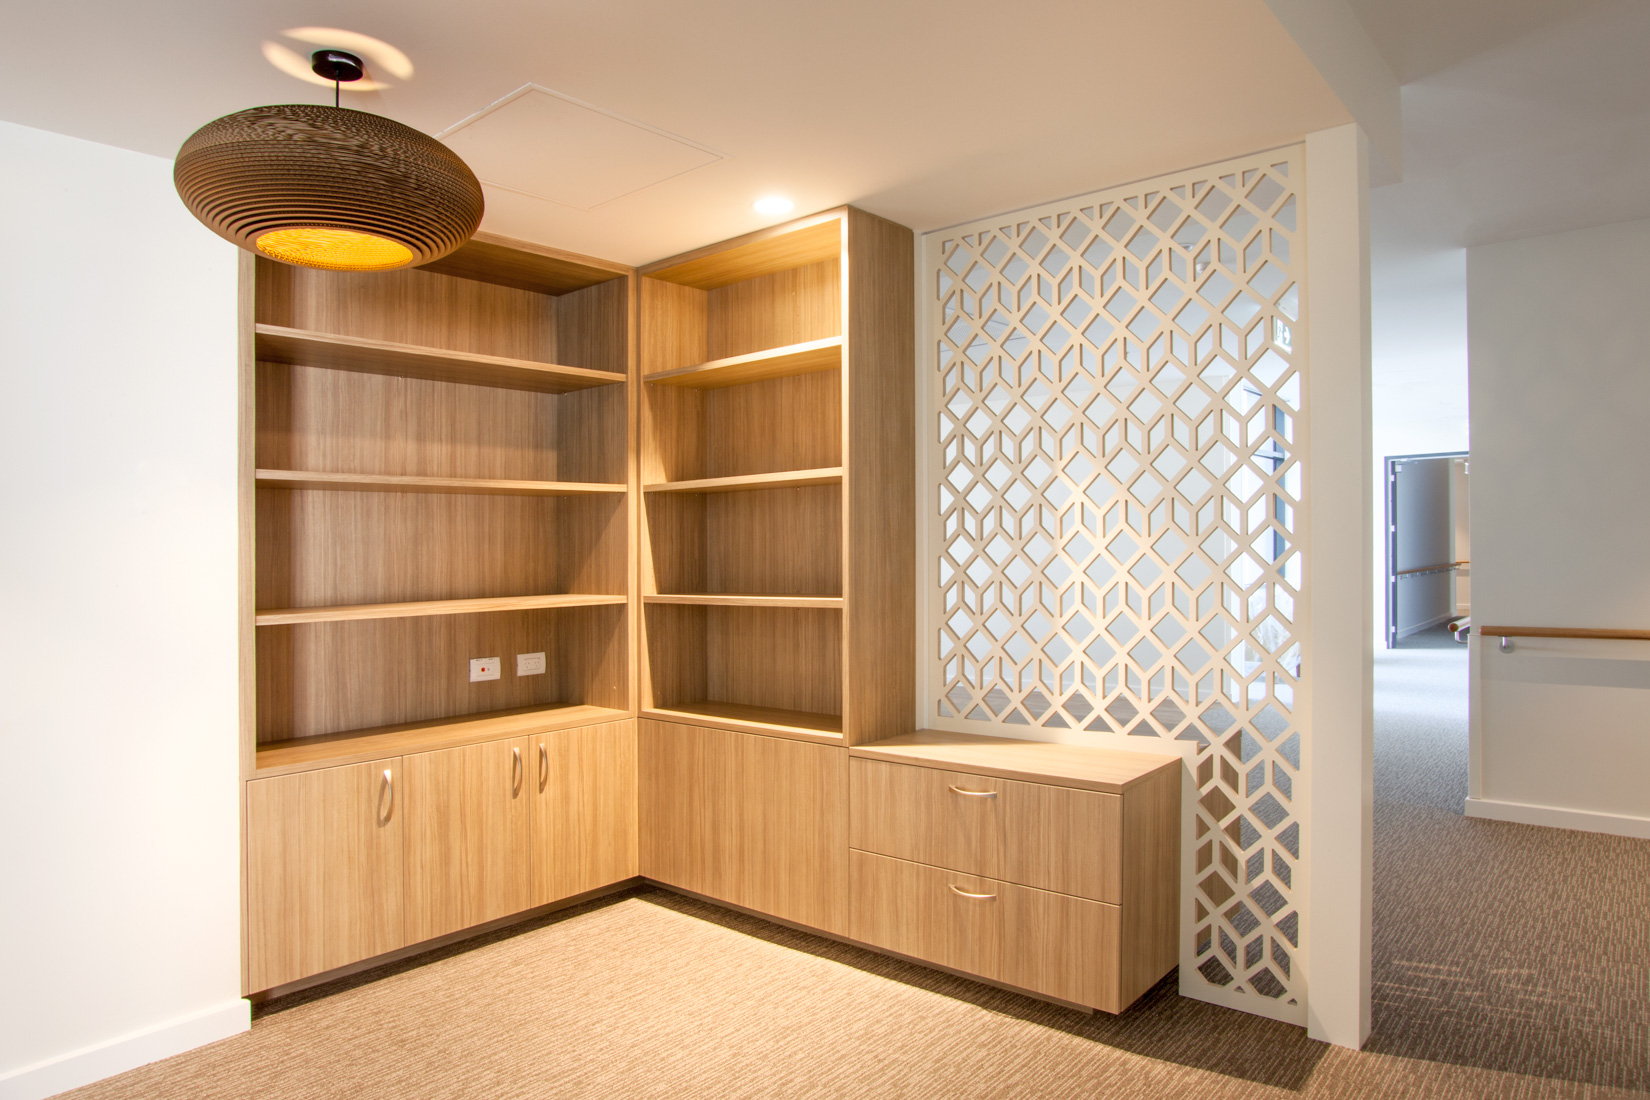 CaSPA Aged Care joinery by ISM Interiors